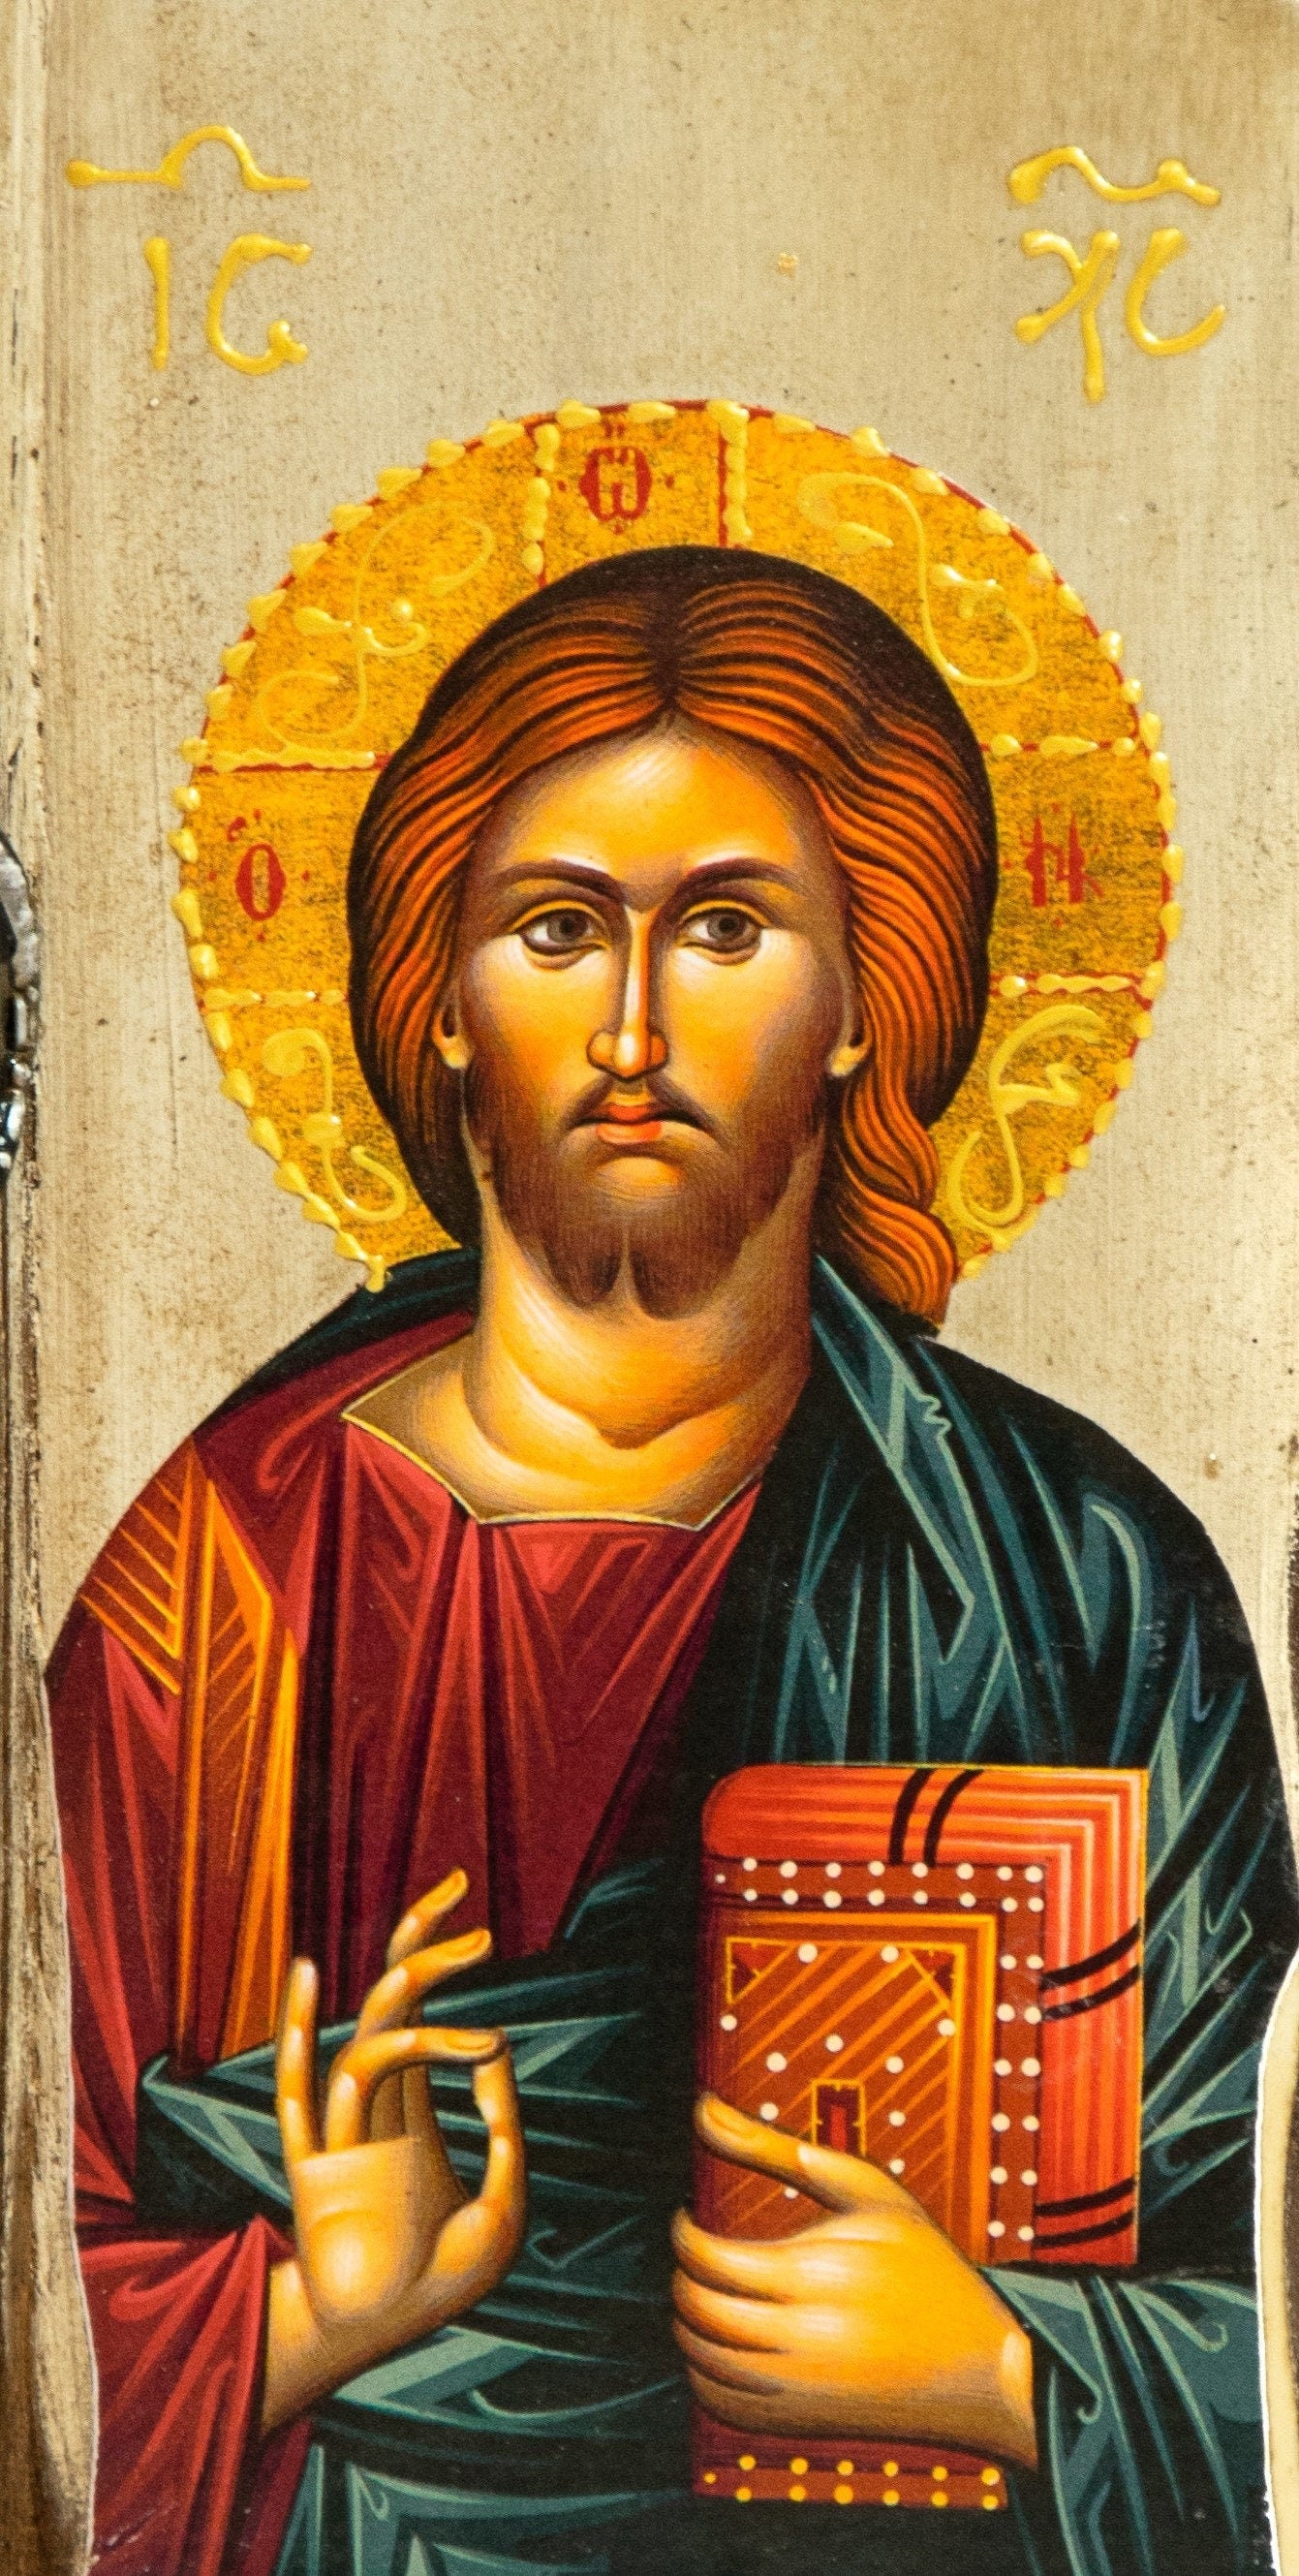 Jesus Christ icon, Handmade Greek Orthodox icon, Byzantine art wall hanging of our Lord on wood plaque, religious decor 29x14cm, home decor TheHolyArt